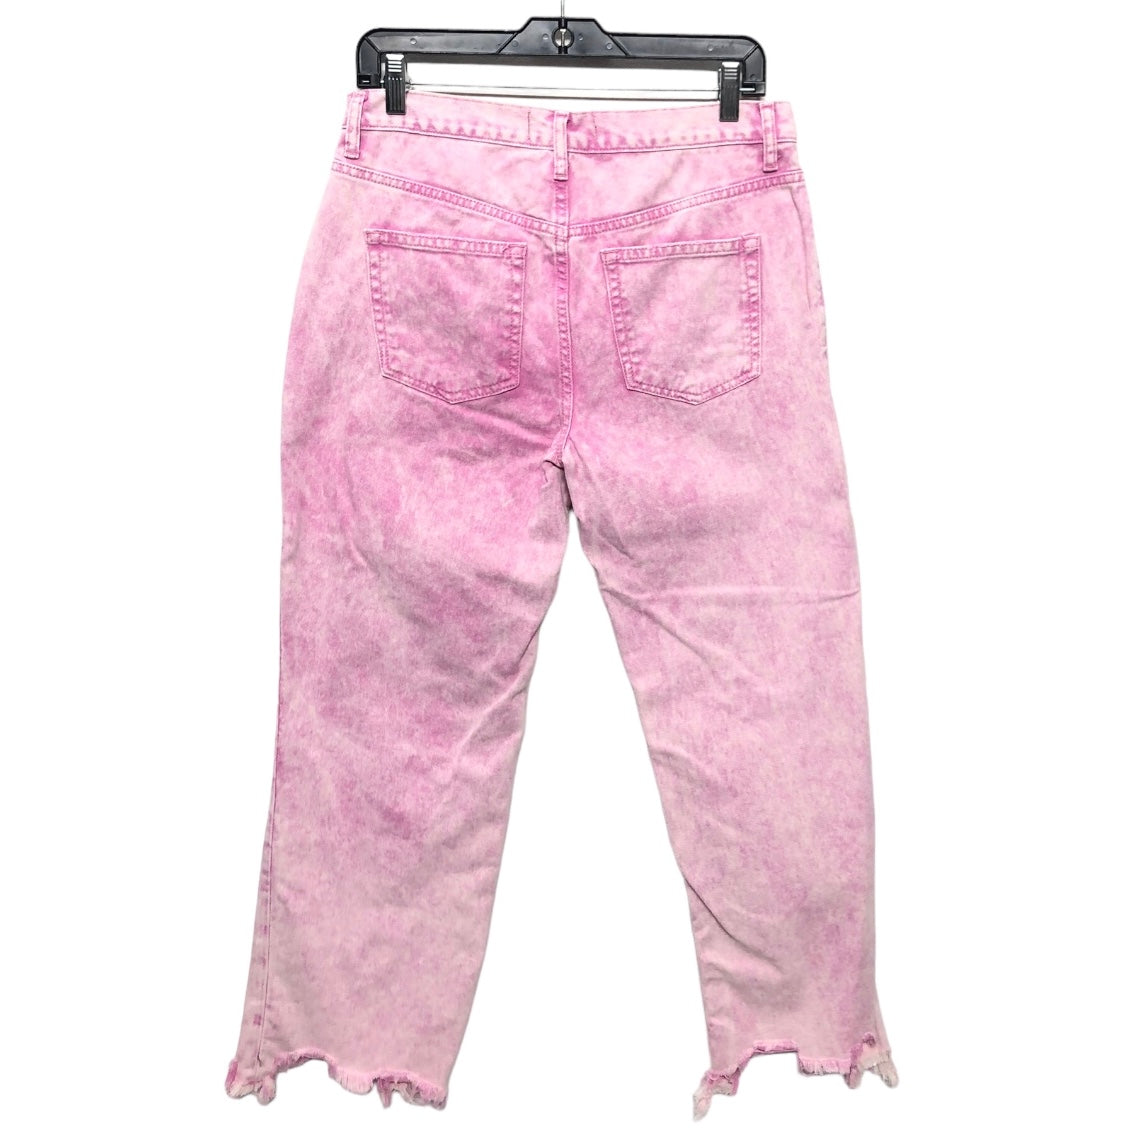 Pink Jeans Wide Leg We The Free, Size 6